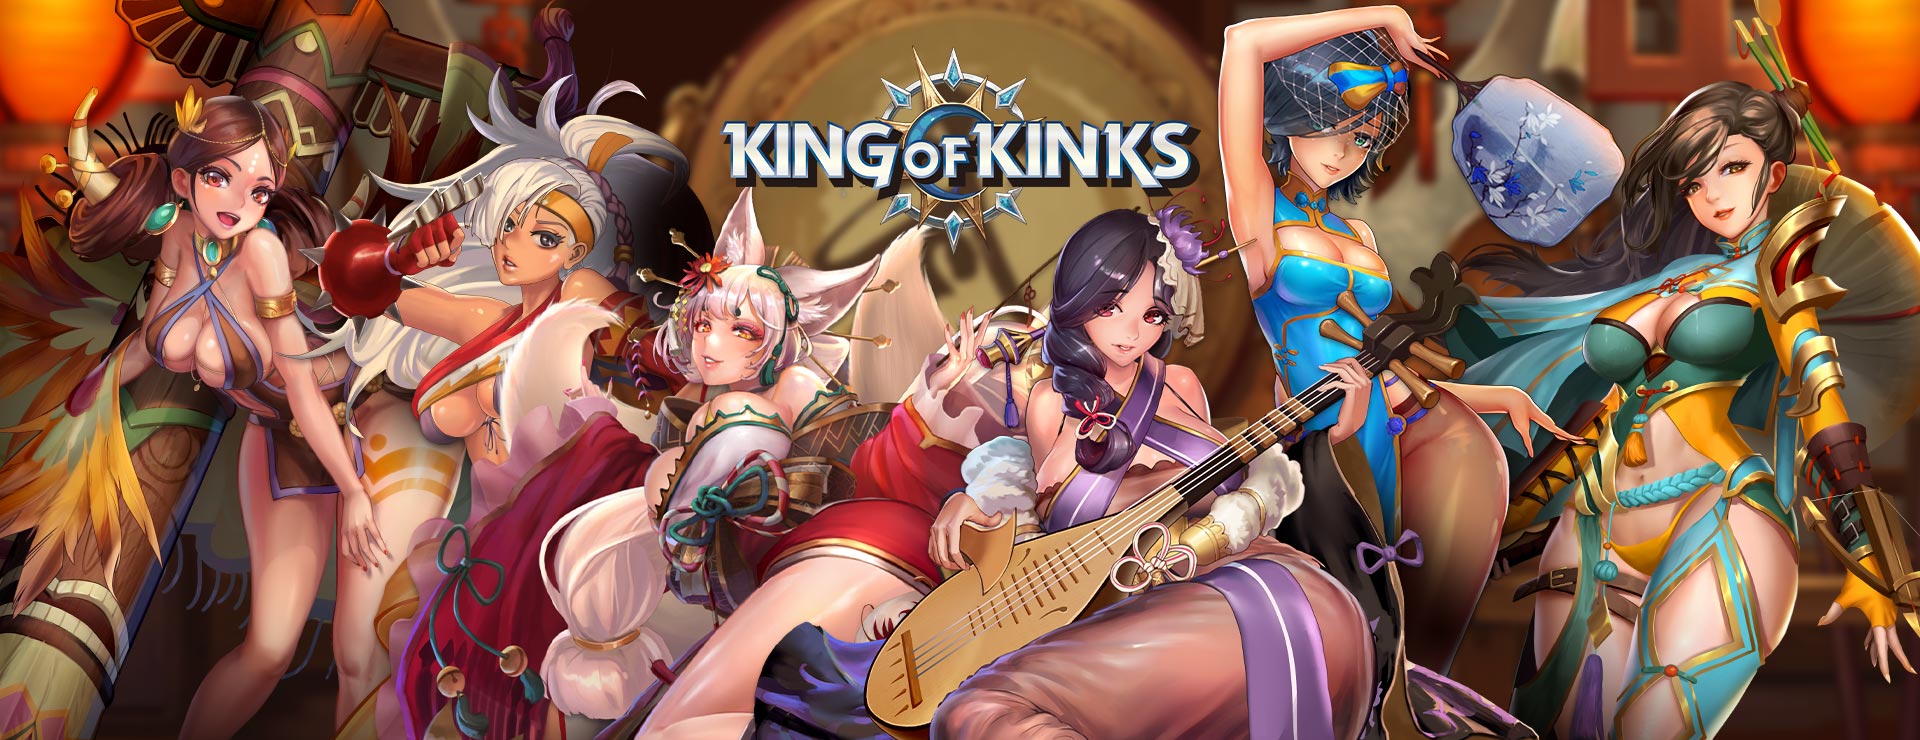 King of Kinks Game - Action Adventure Game